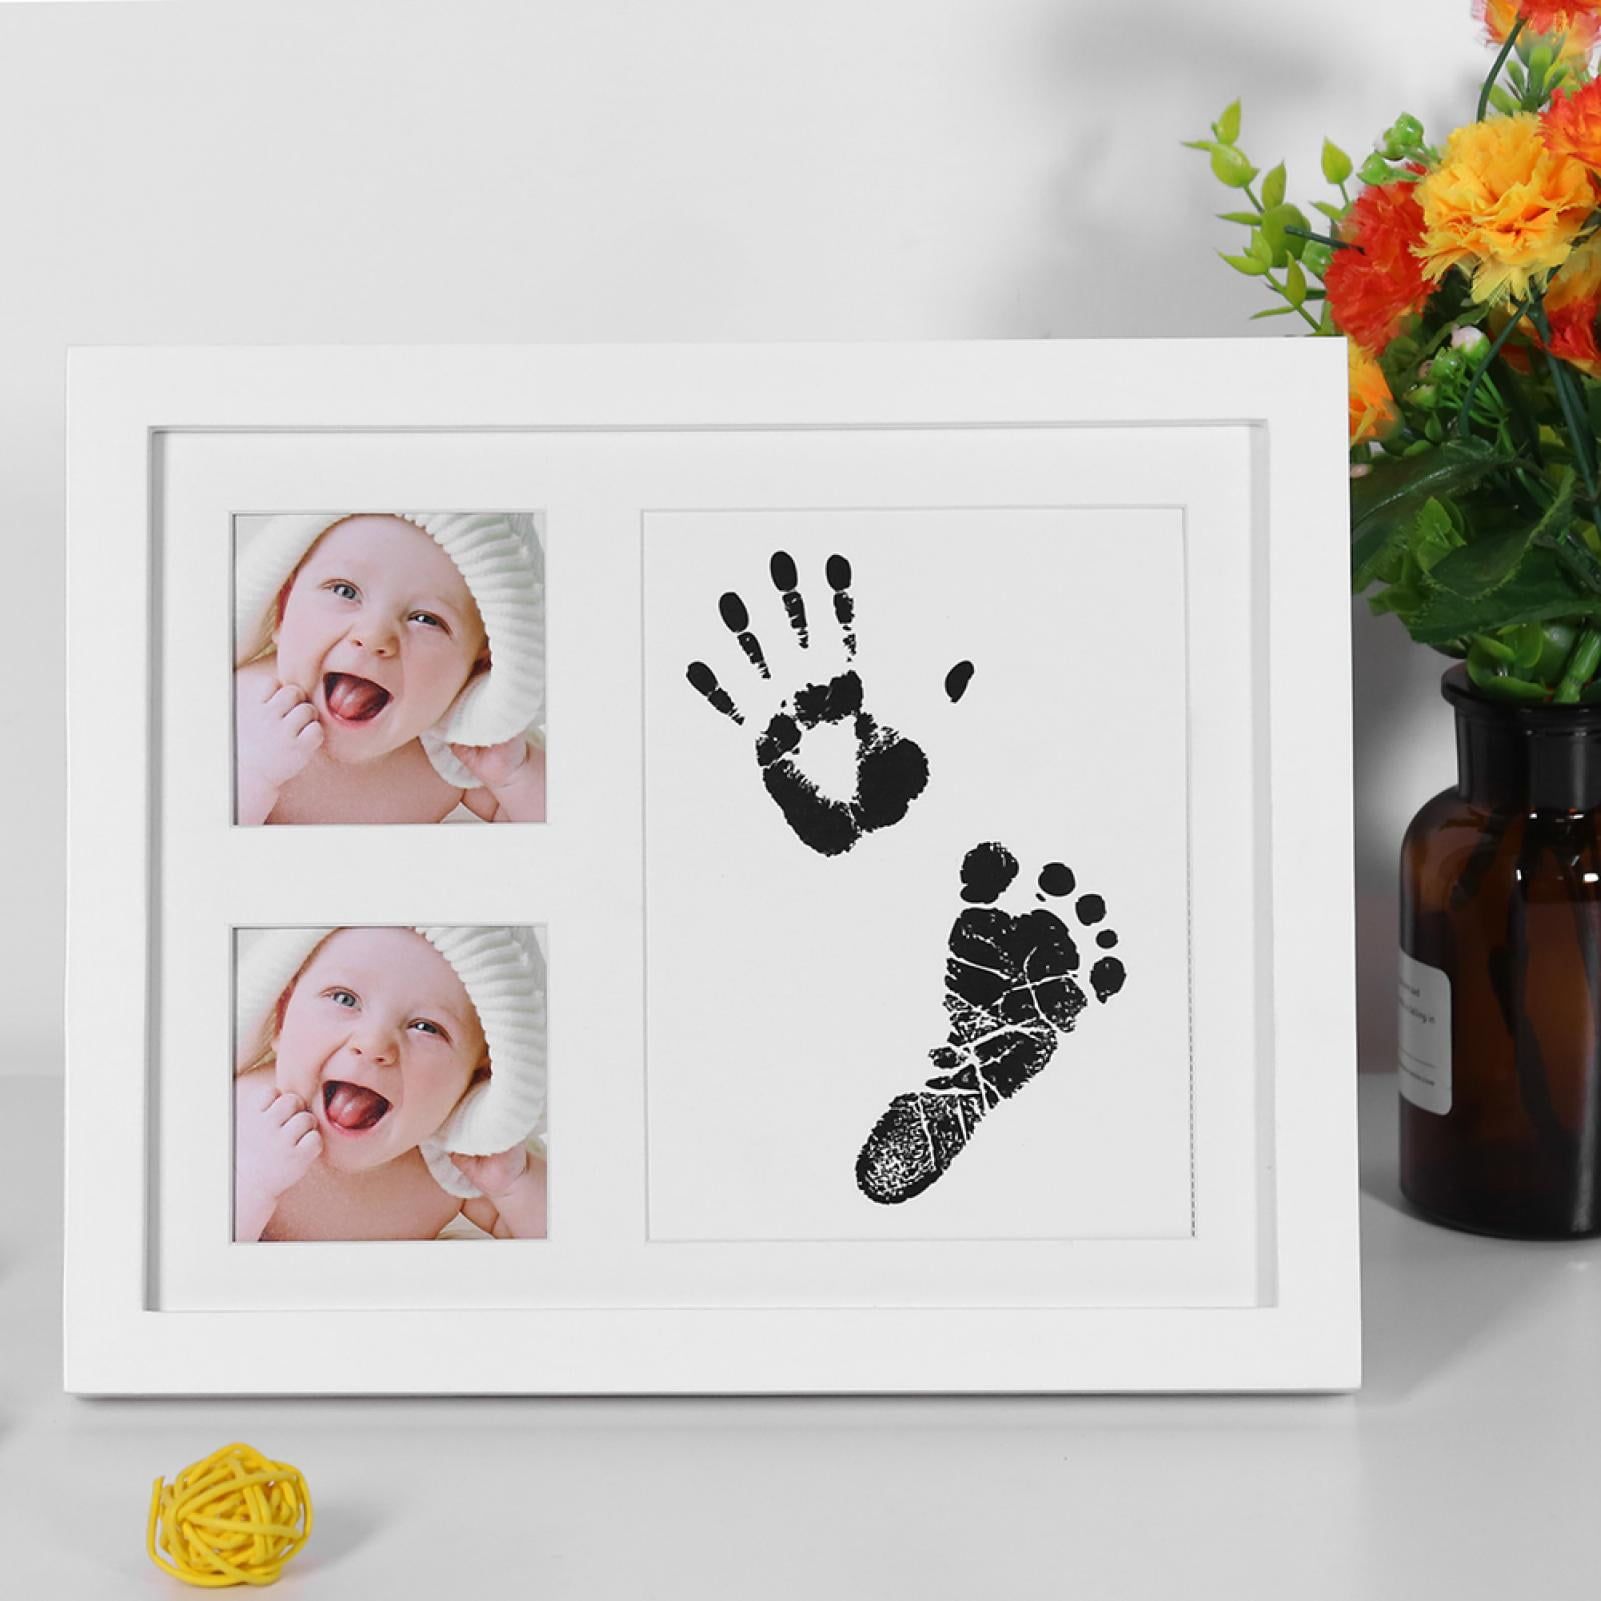  Baby Footprint Kit Ink Pad for Baby Hand and